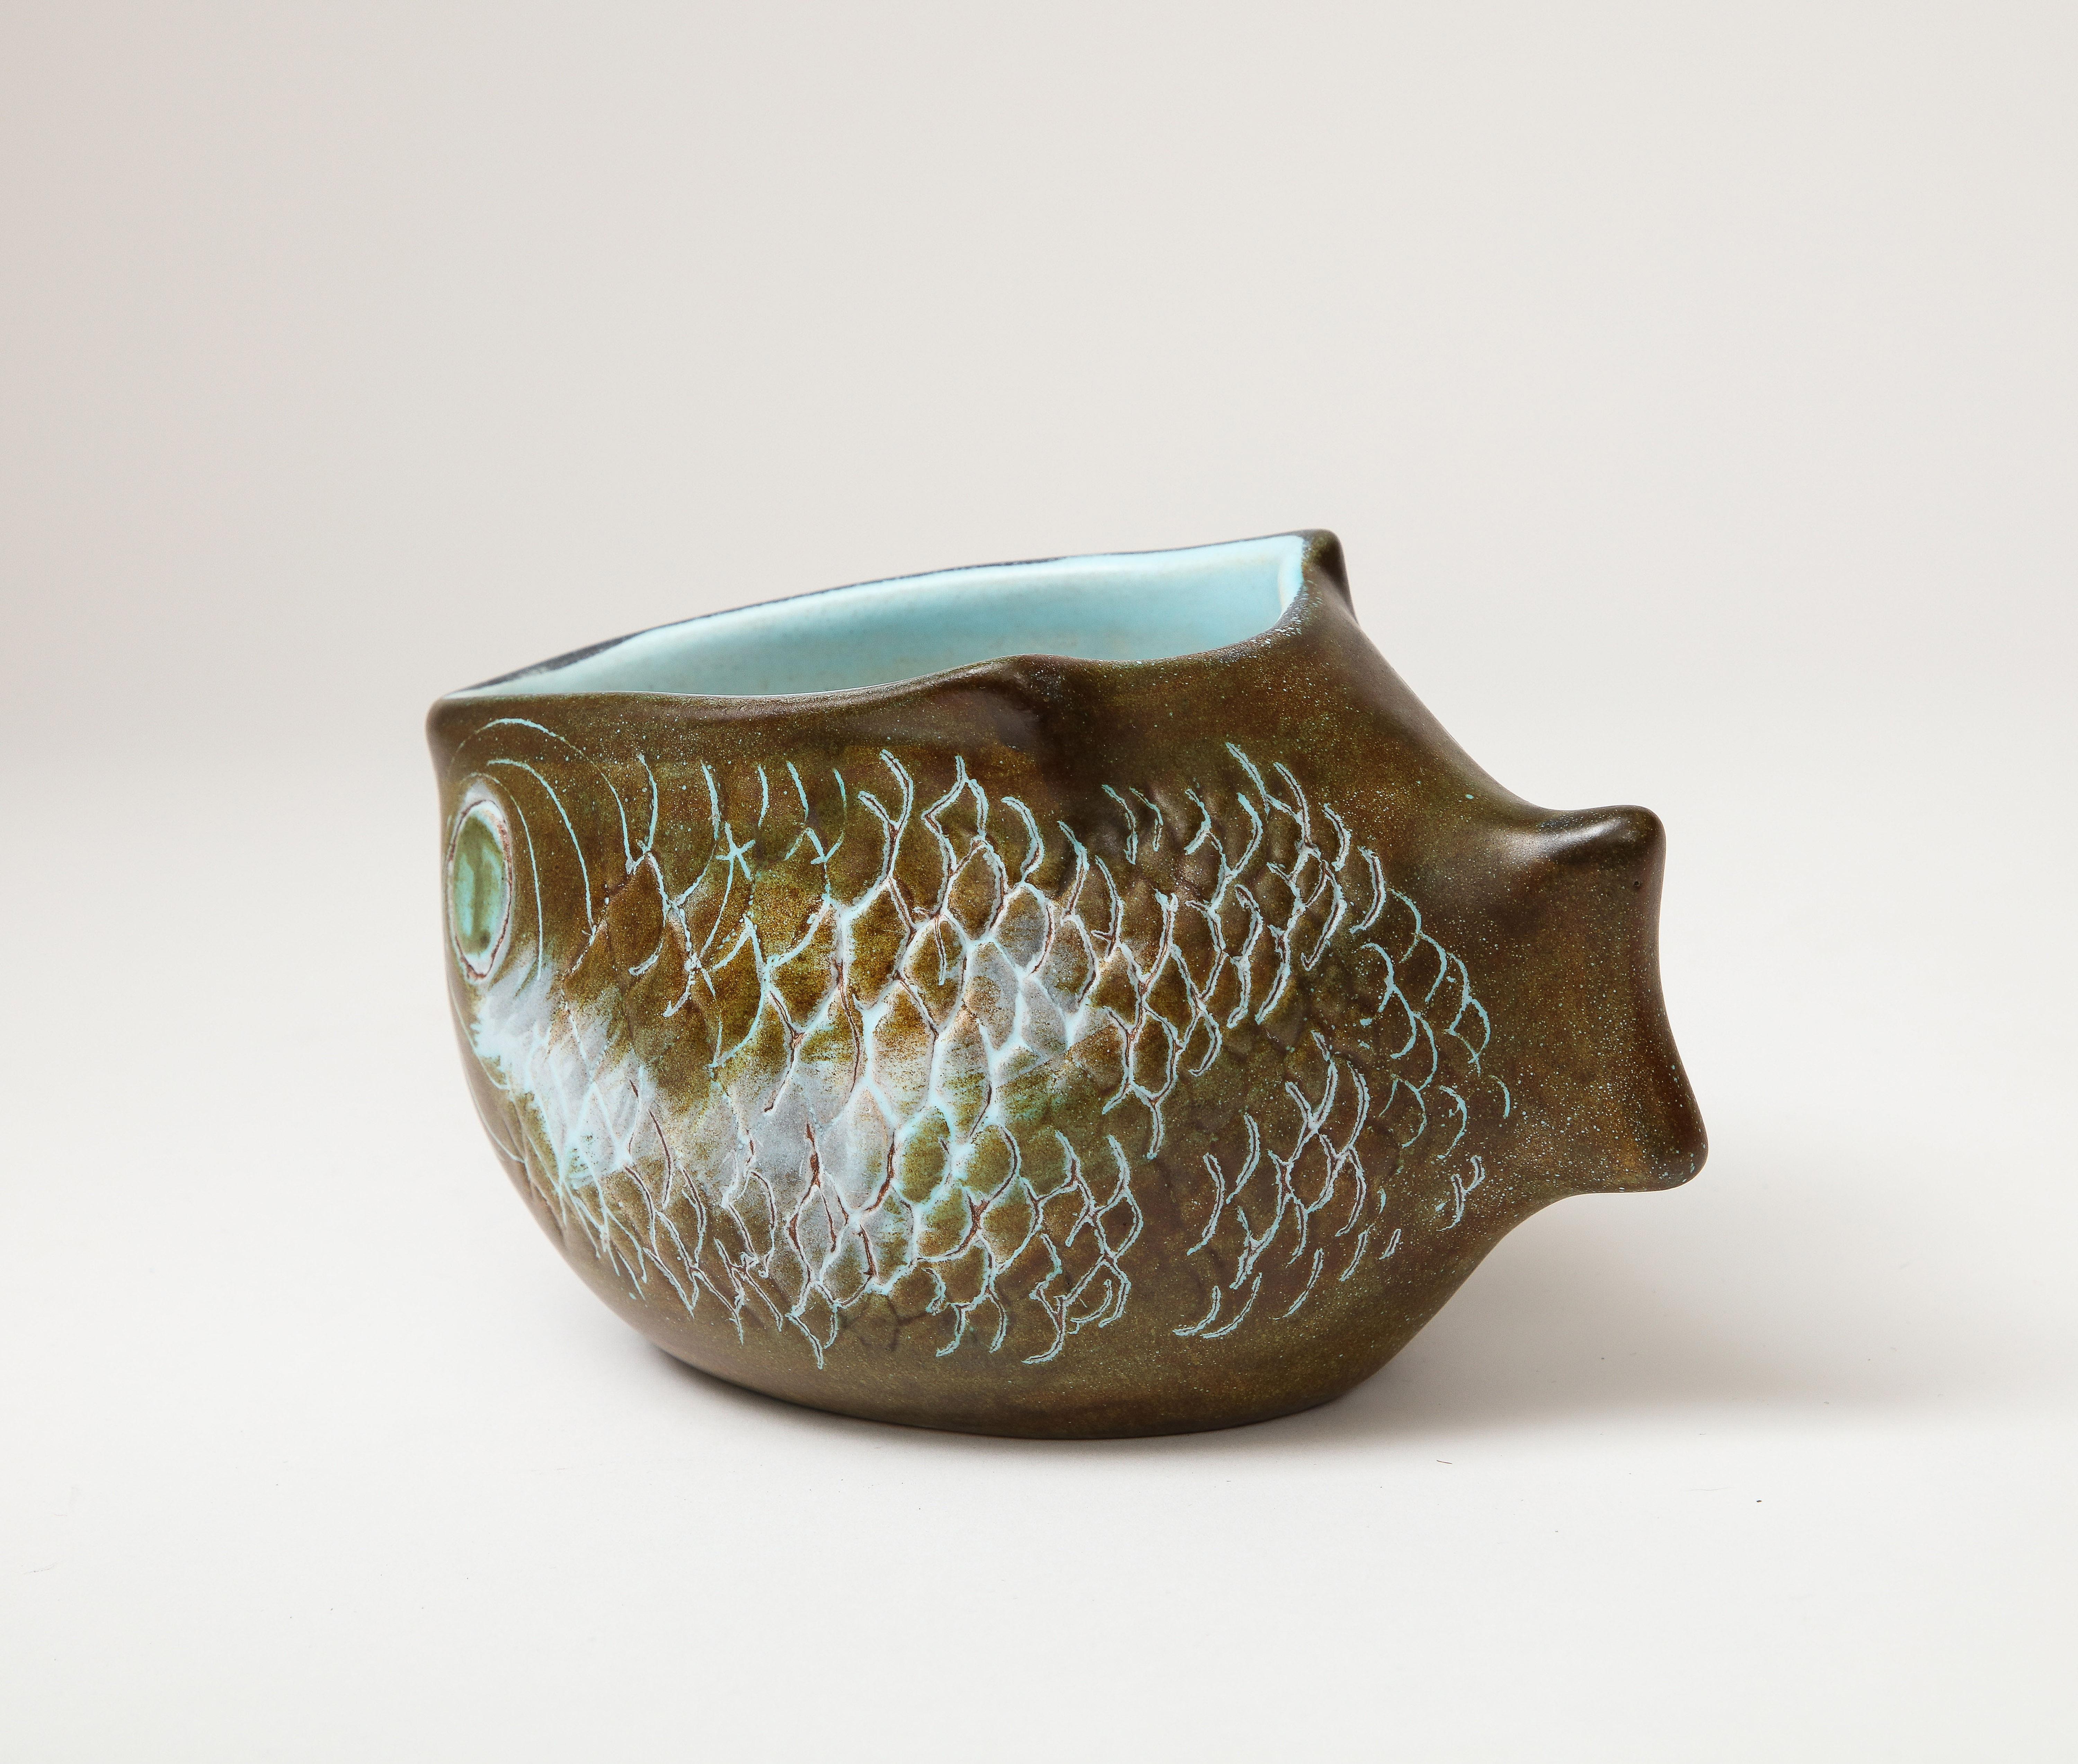 Glazed Ceramic Bowl in the Shape of a Fish, Guillot, c. 1960 For Sale 2